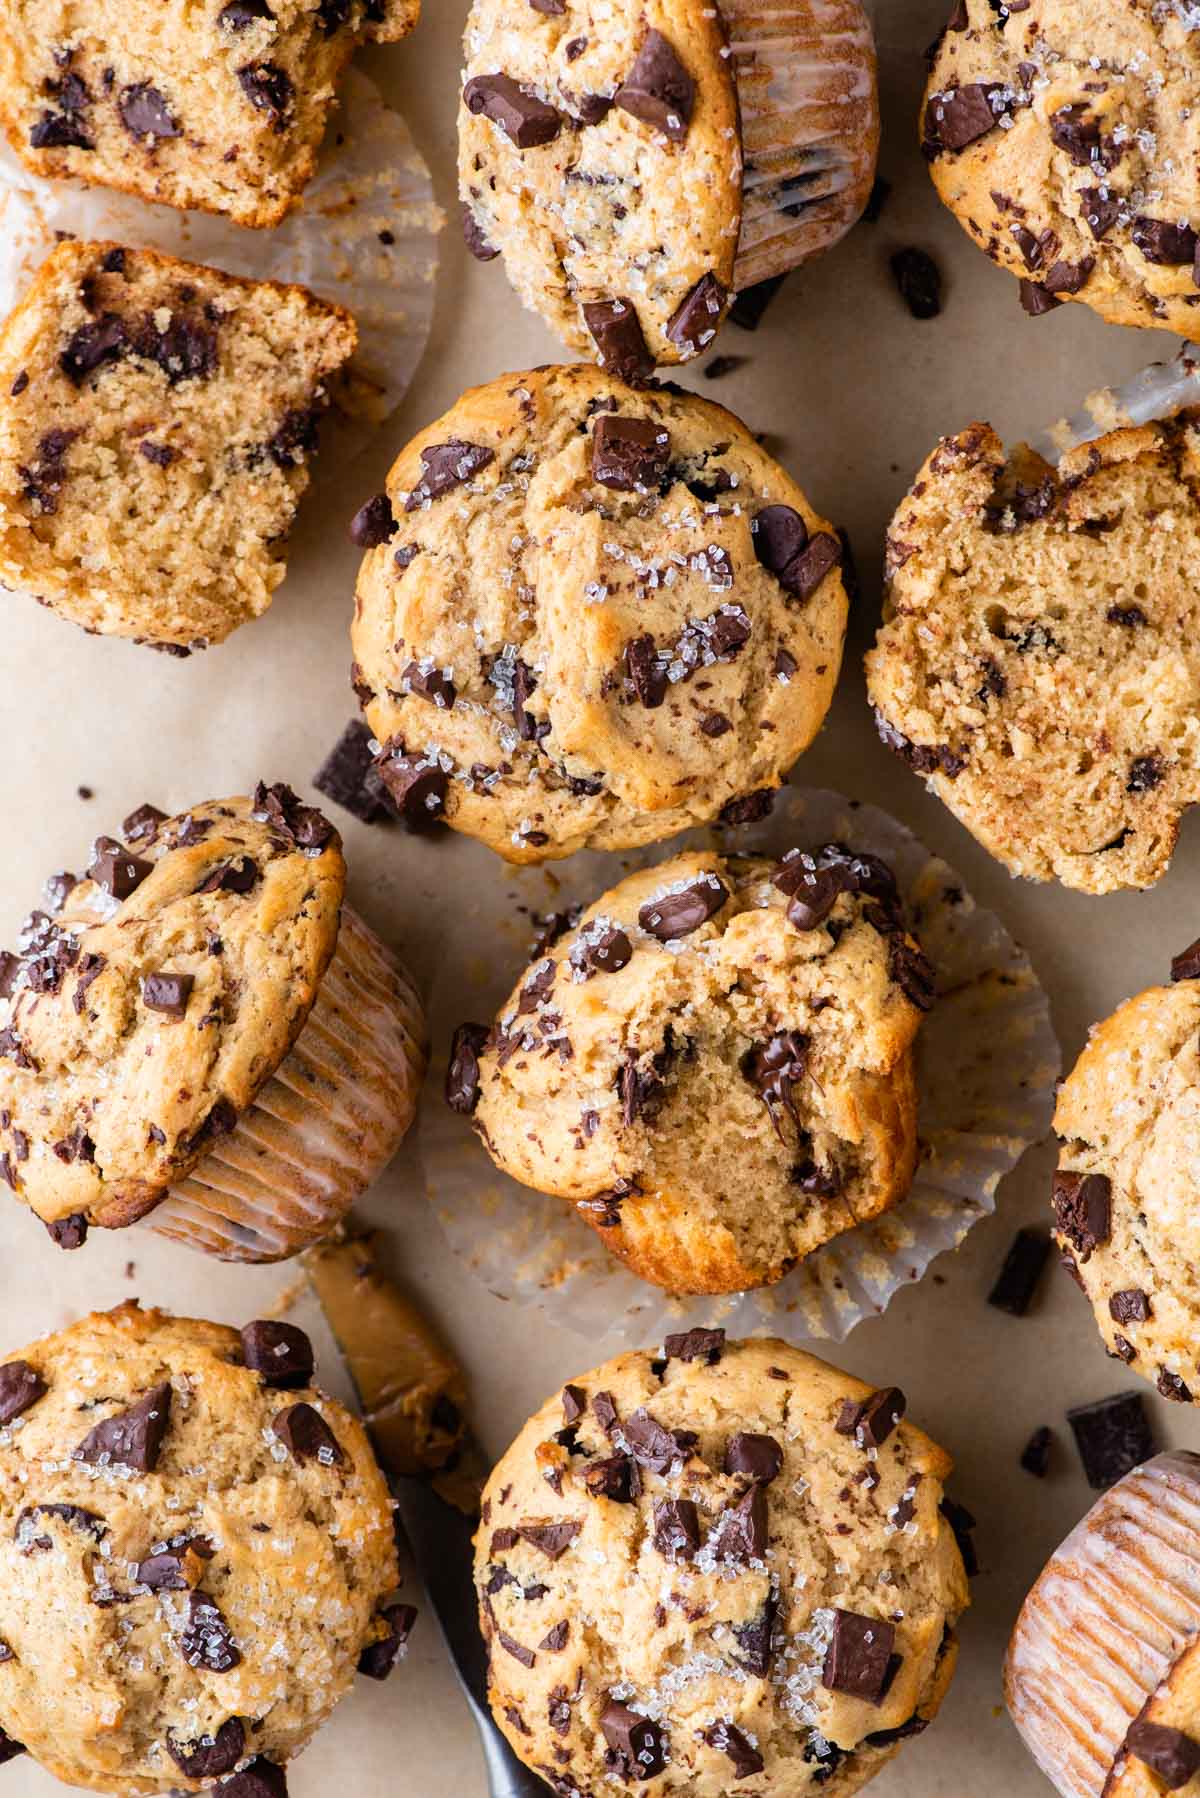 peanut butter muffins with chocolate chips arranged in a grid pattern on brown parchment paper